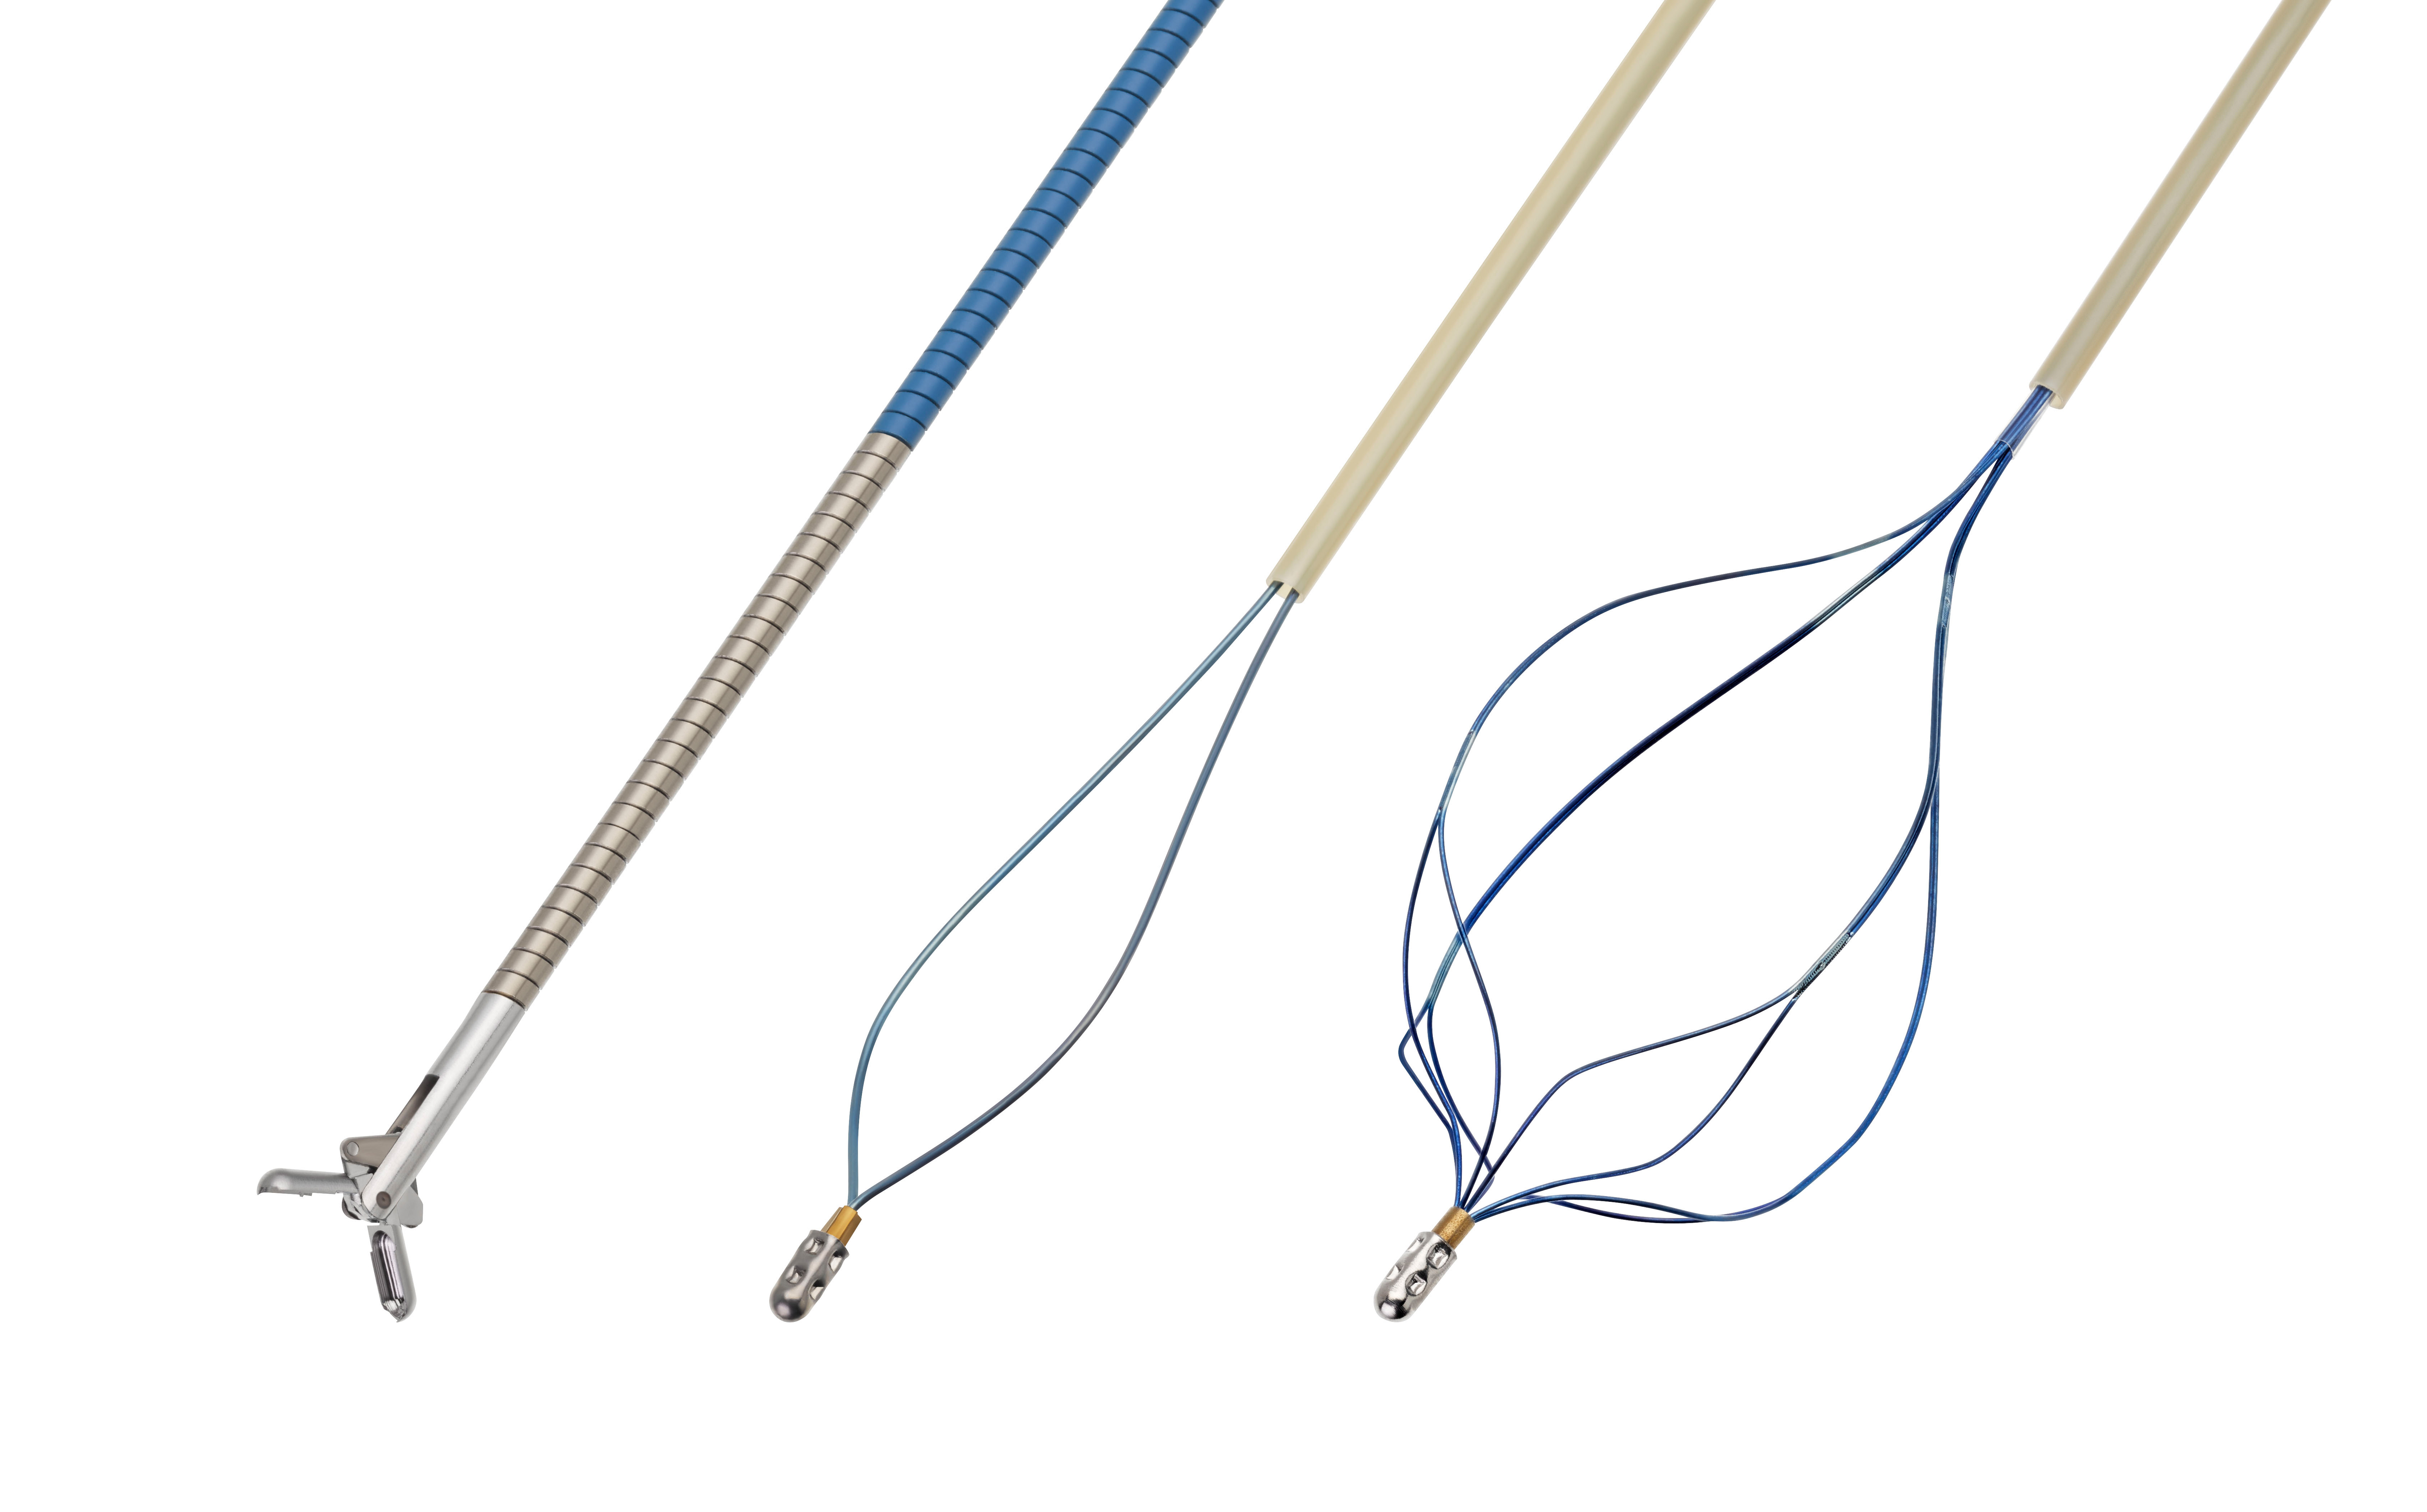 The SpyScope DS II Catheter is compatible with a full suite of diagnostic and therapeutic accessories.